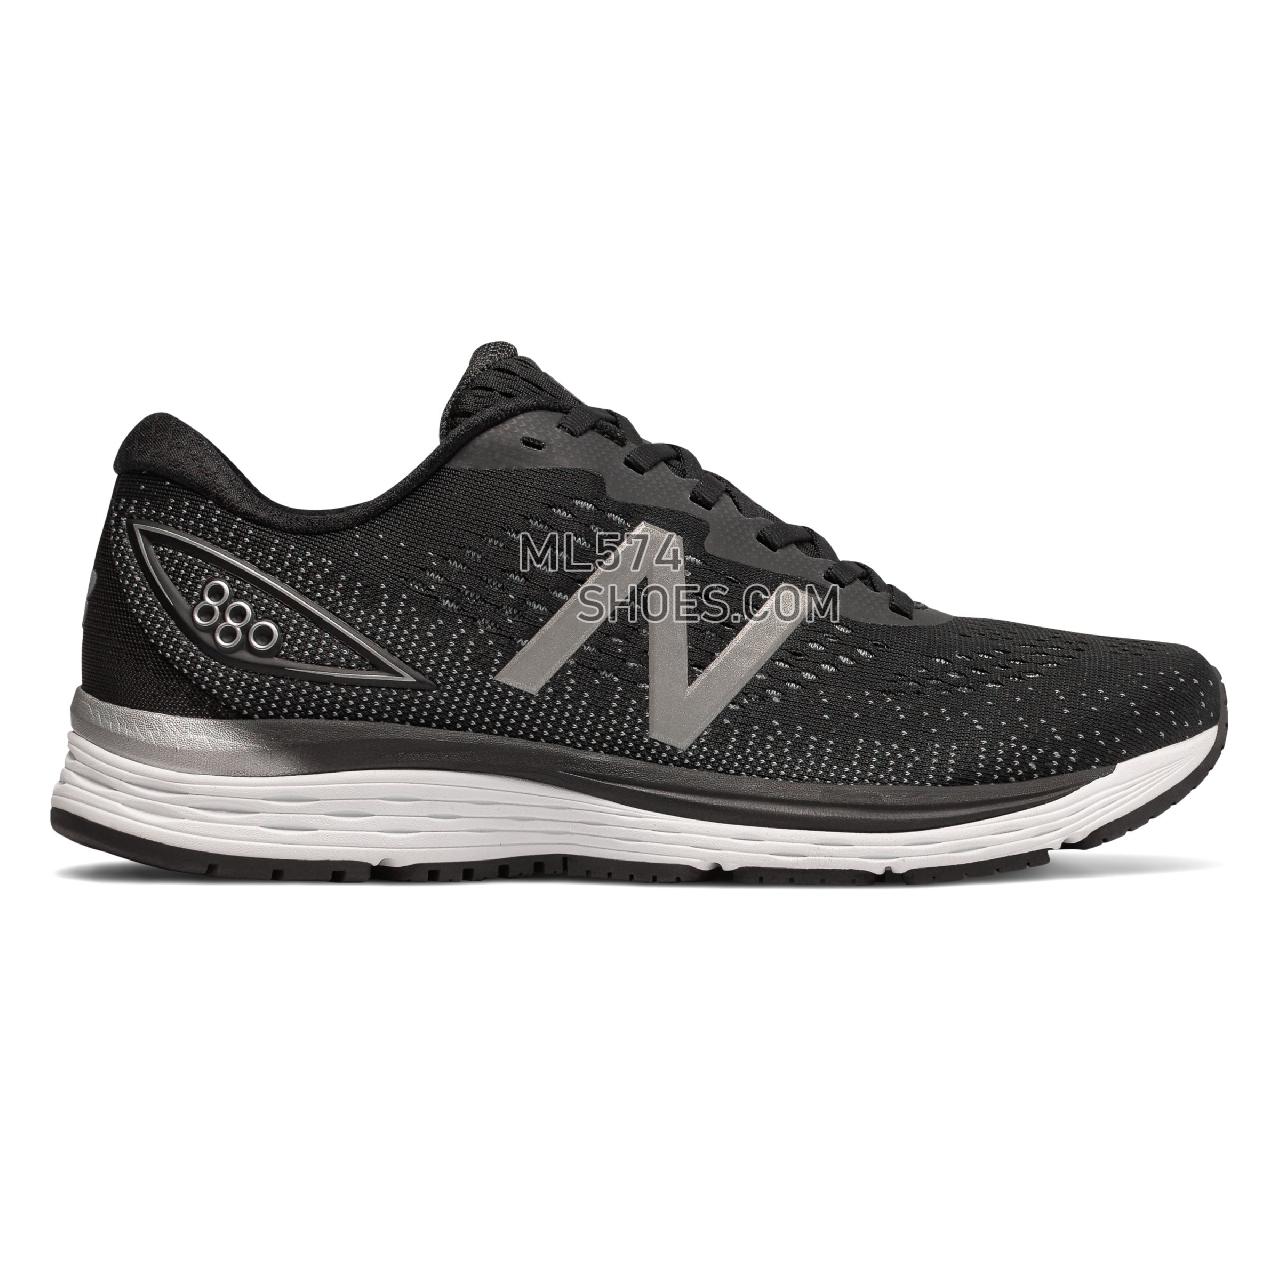 New Balance 880v9 - Men's Neutral Running - Black with Steel and Orca - M880BK9